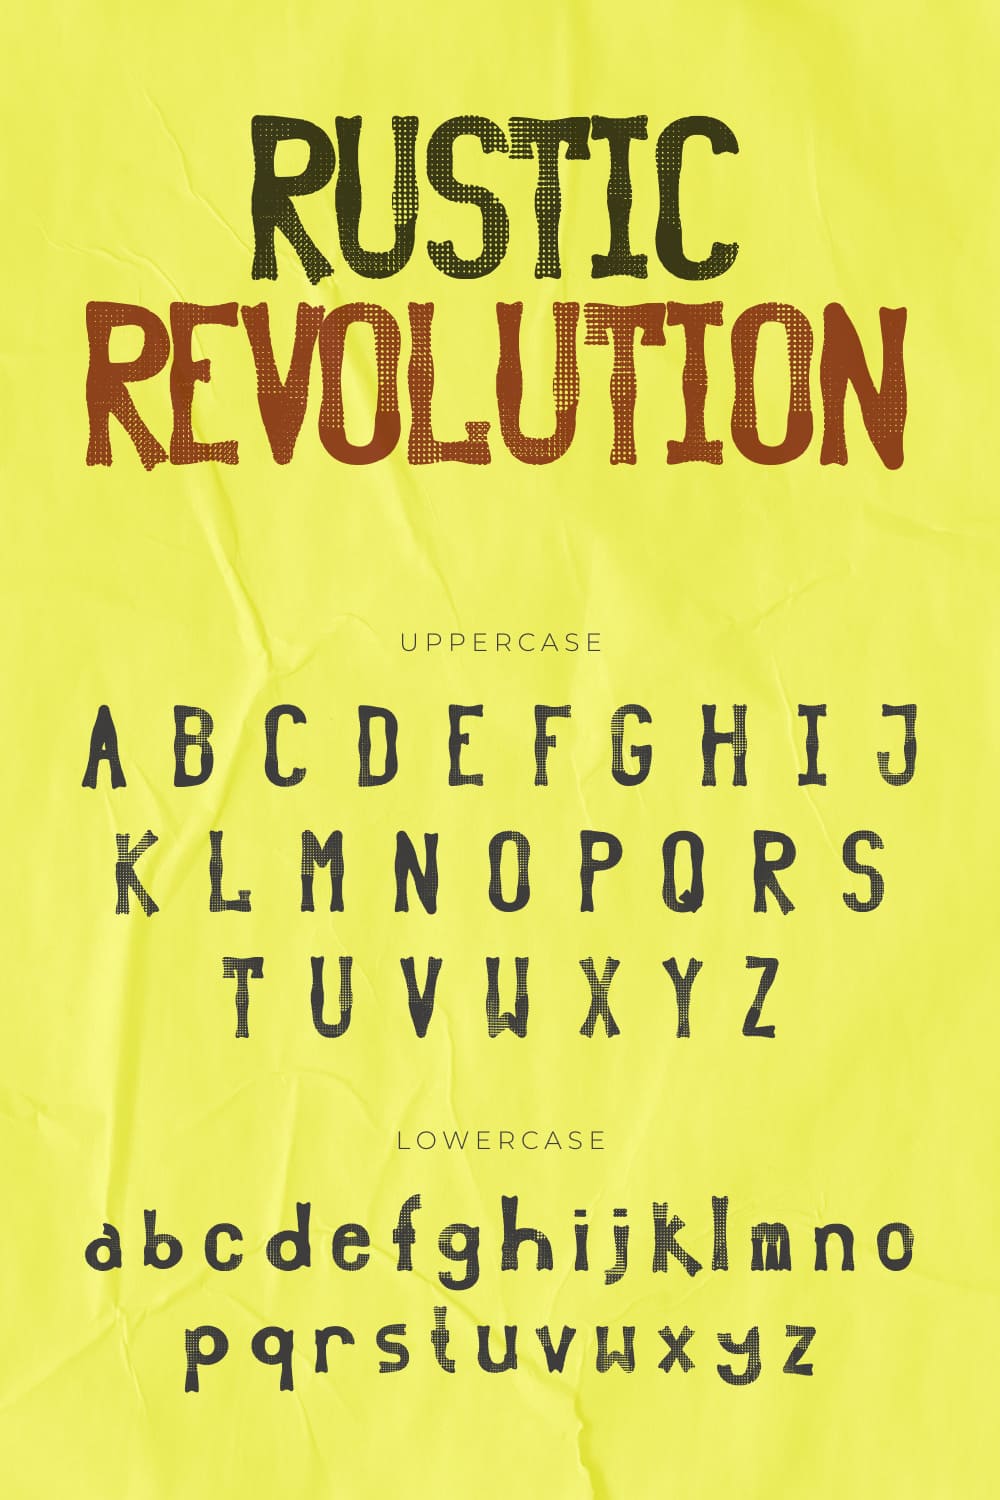 Rustic revolution free font Pinterest uppercase and lowercase preview.